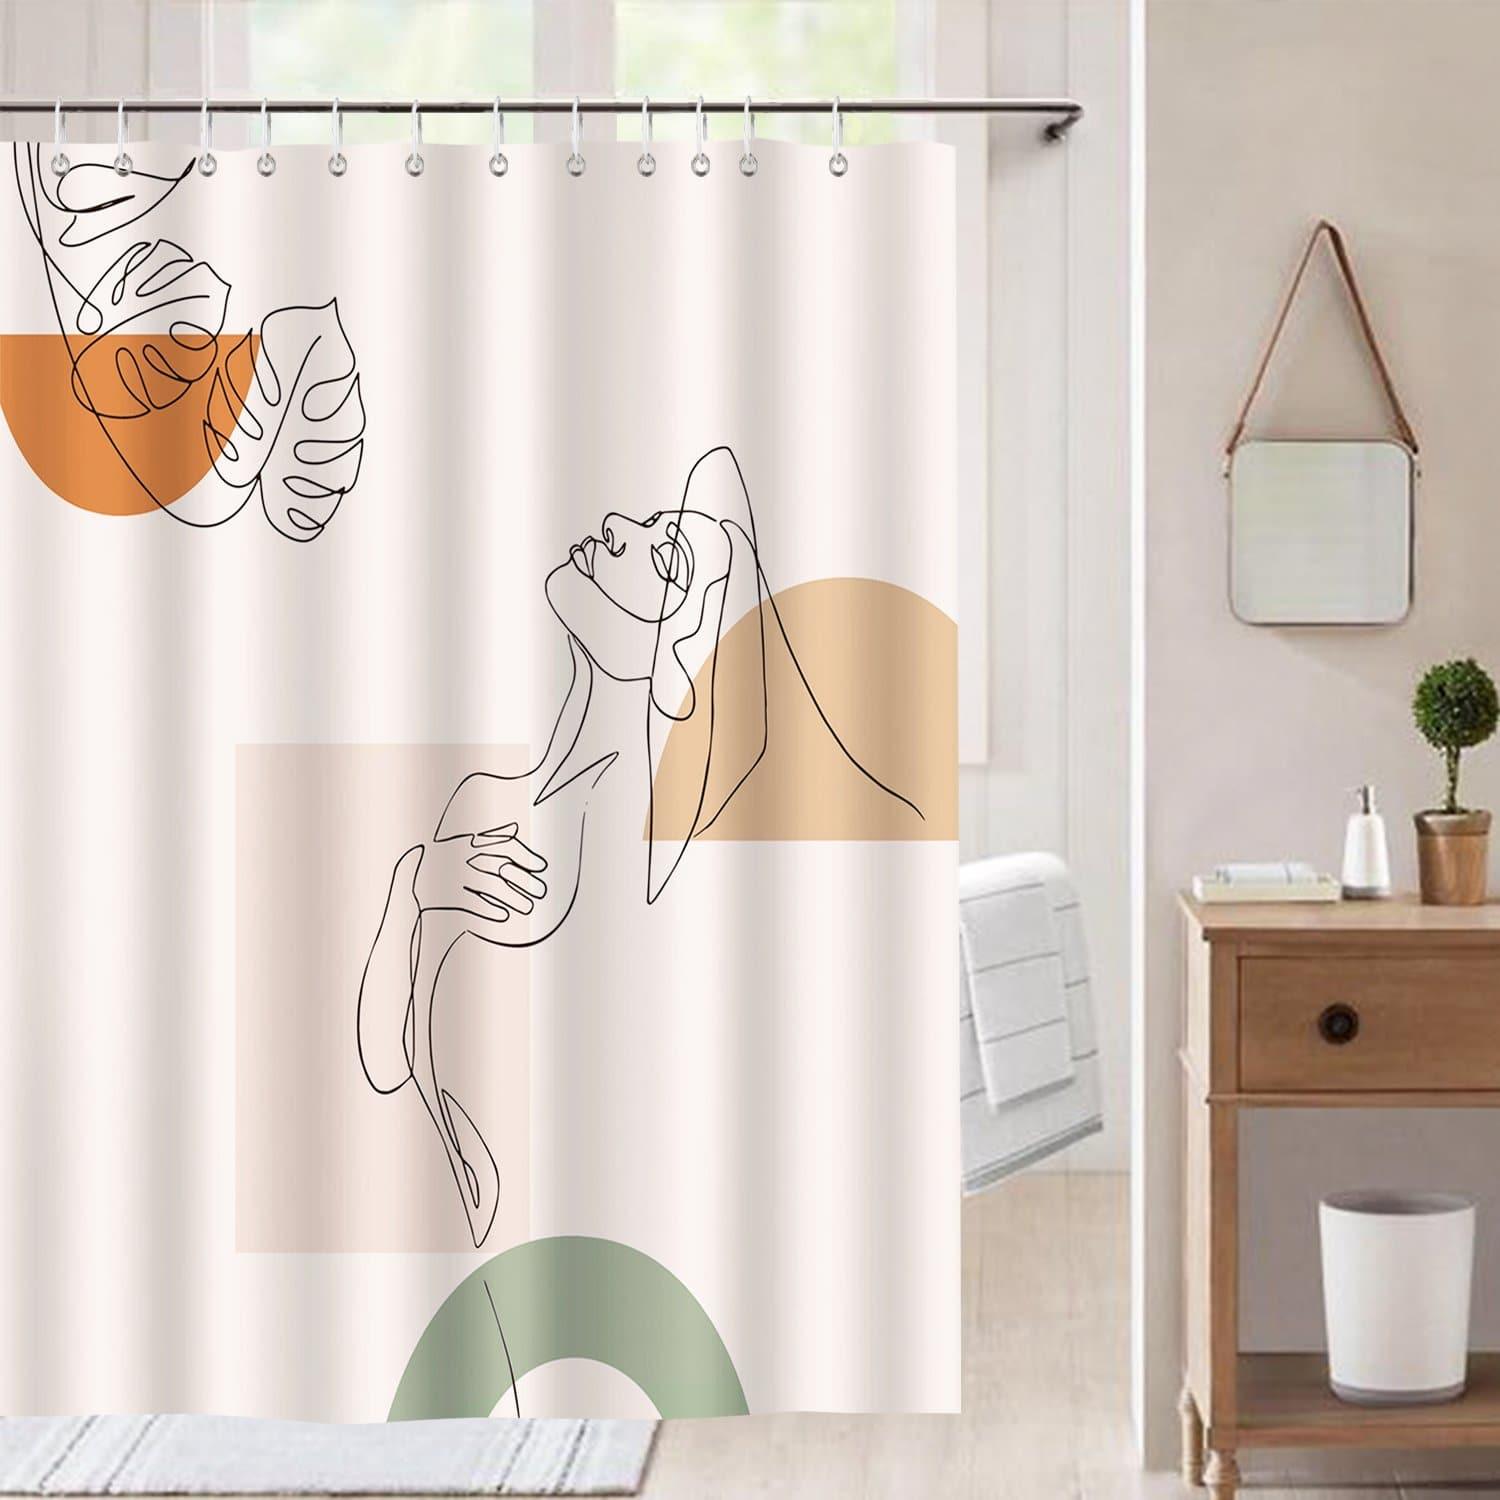 Abstract Woman Shower Curtain